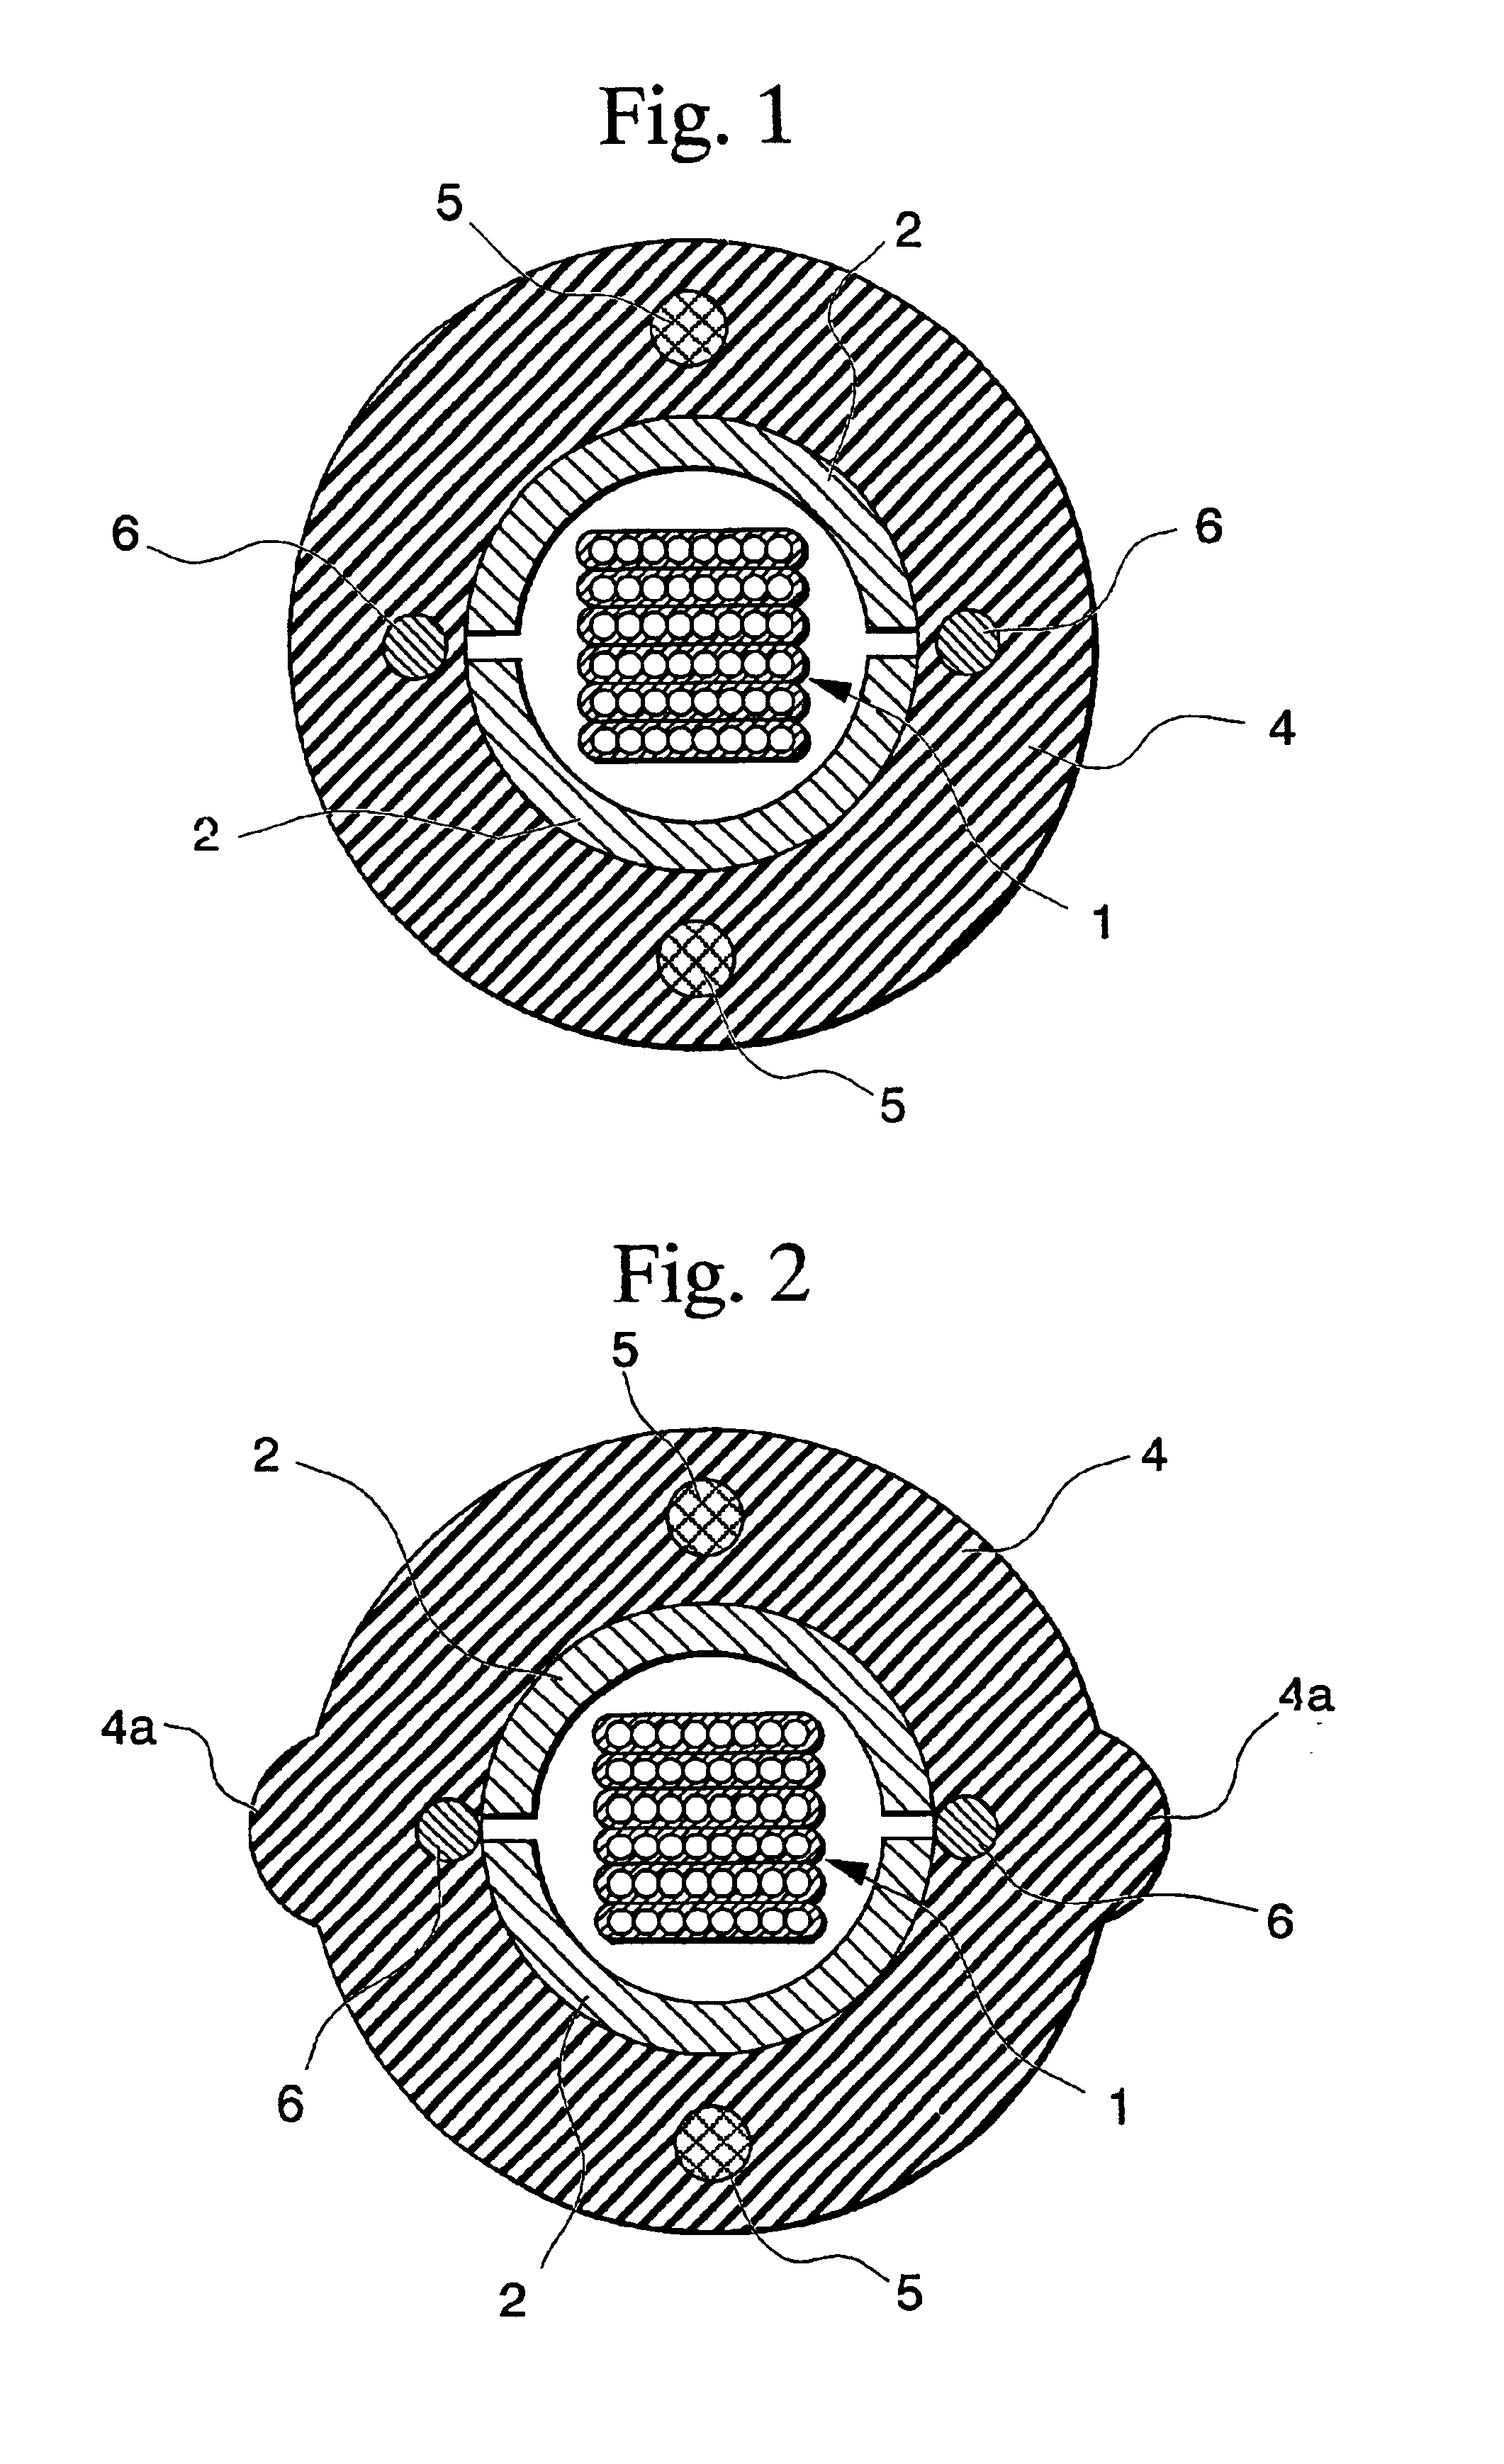 Optical cable having forming tape and rip cords